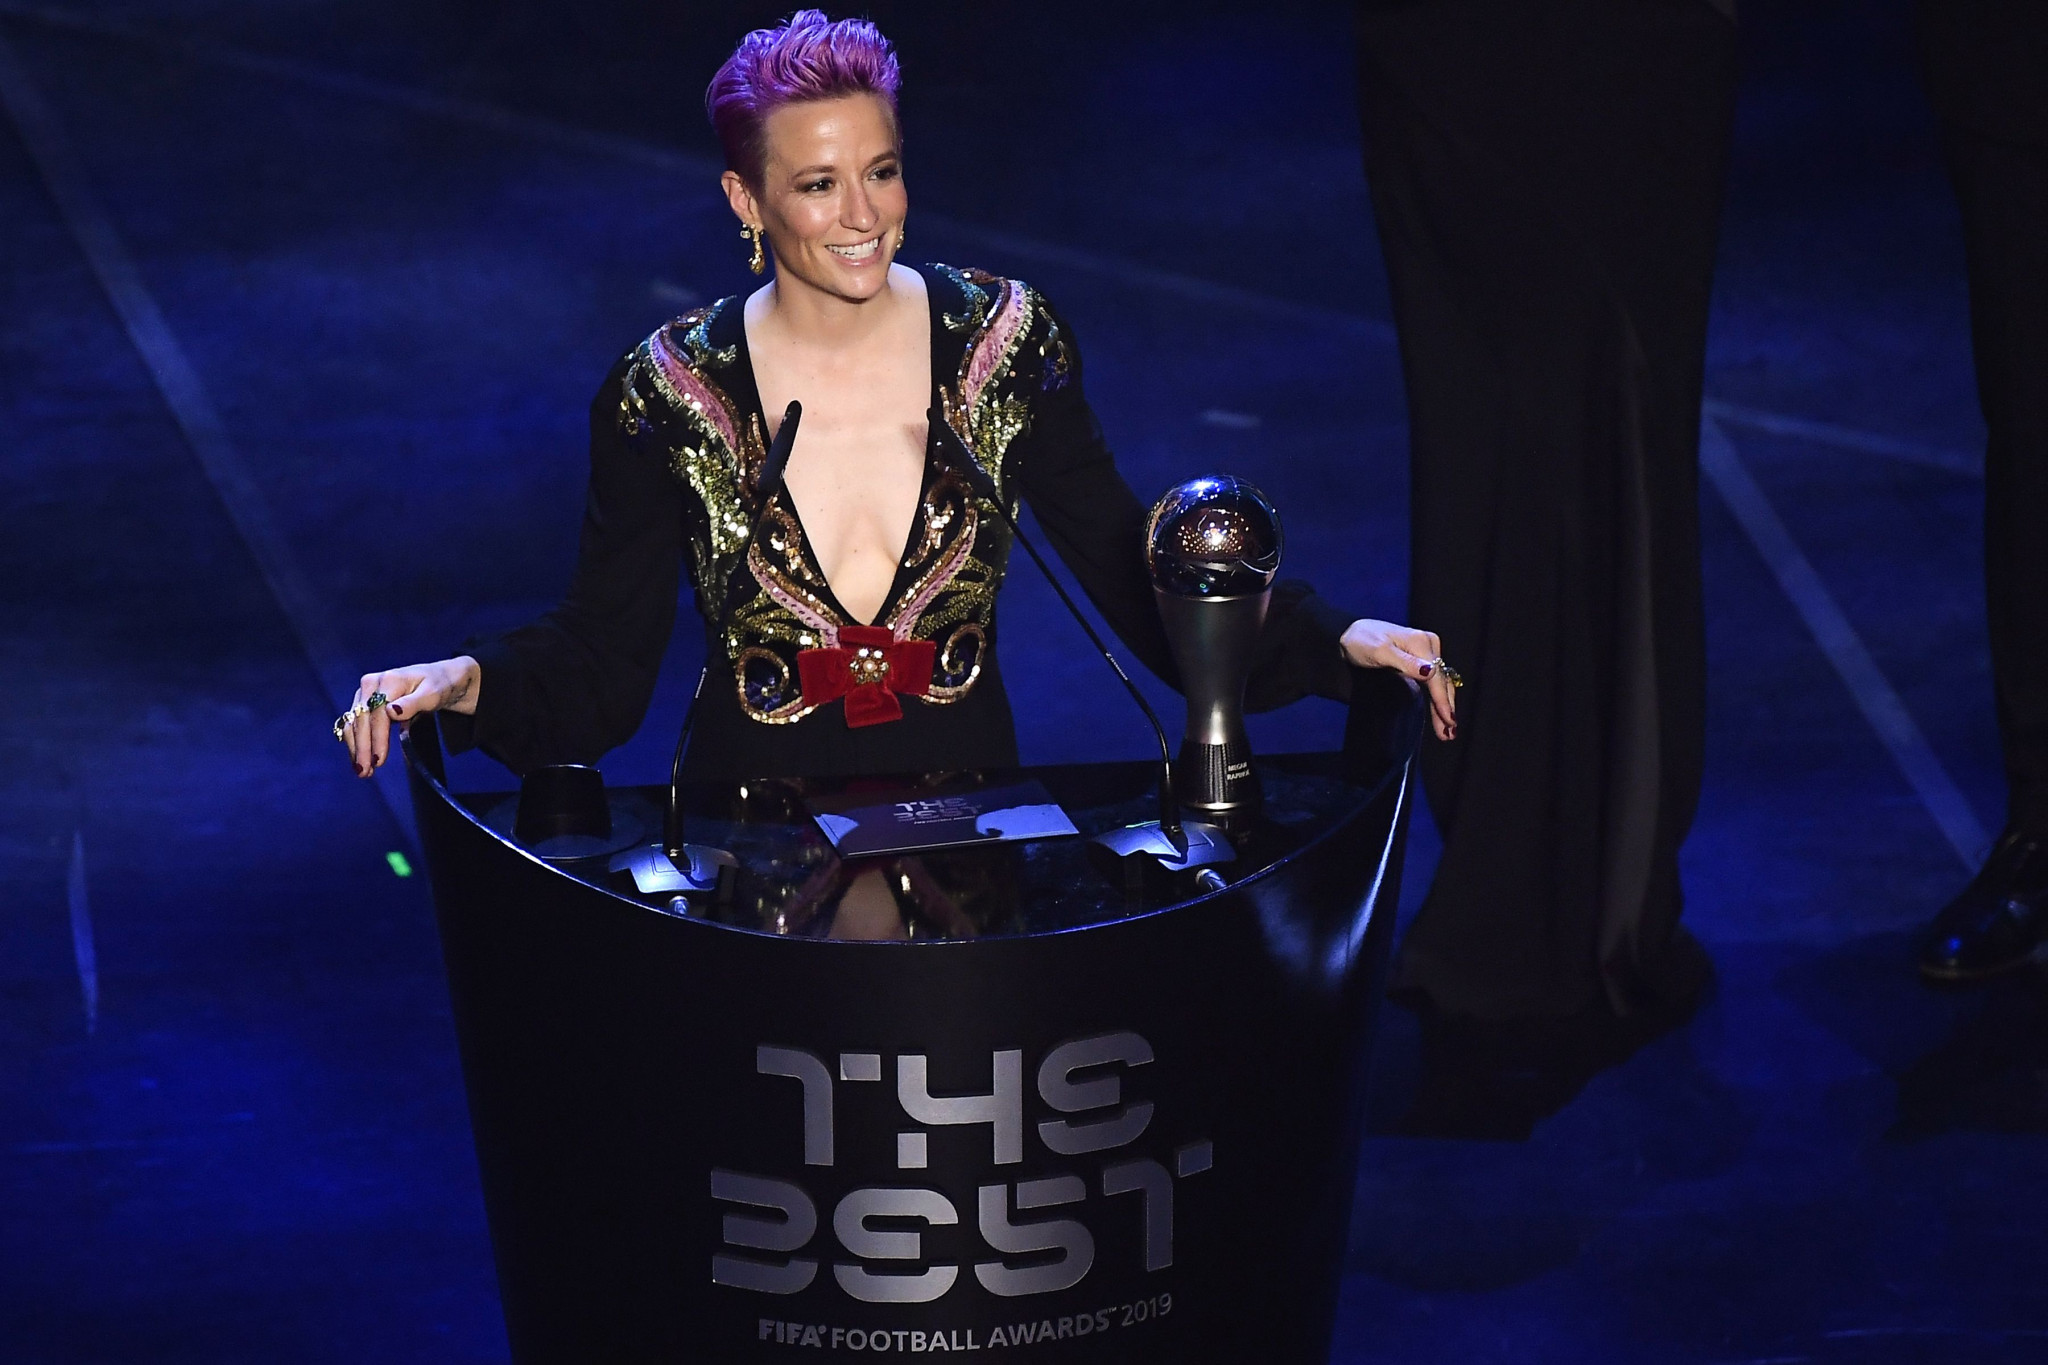 Megan Rapinoe encouraged other athletes to speak out when she received her FIFA Best Player of the Year award ©Getty Images